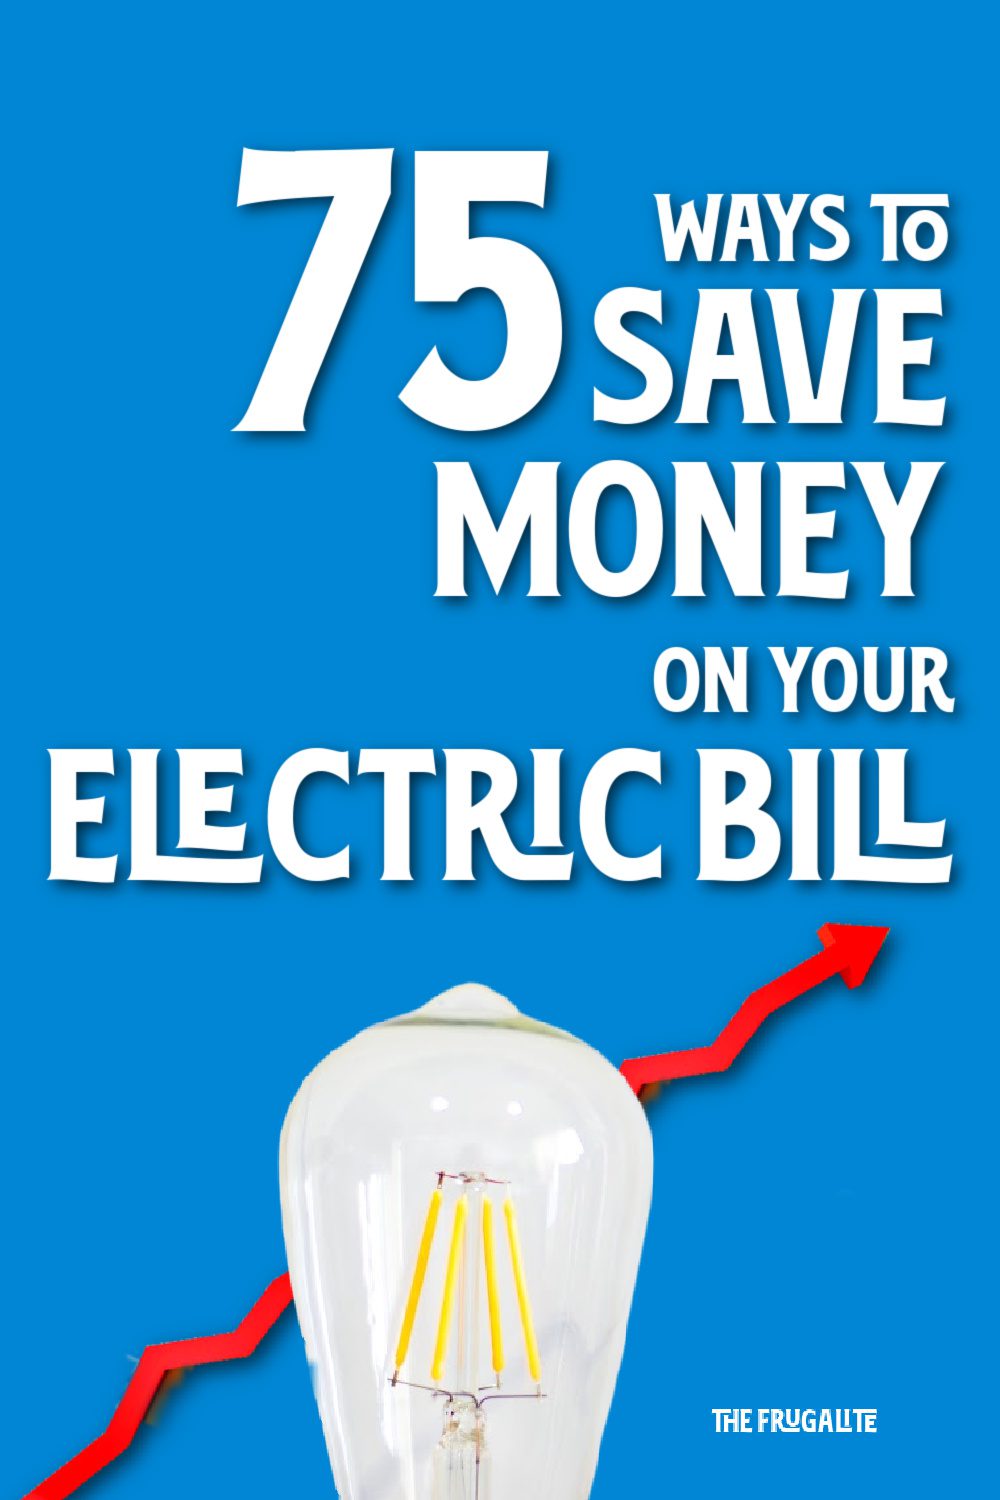 75 Ways to Save Money on Your Electric Bill